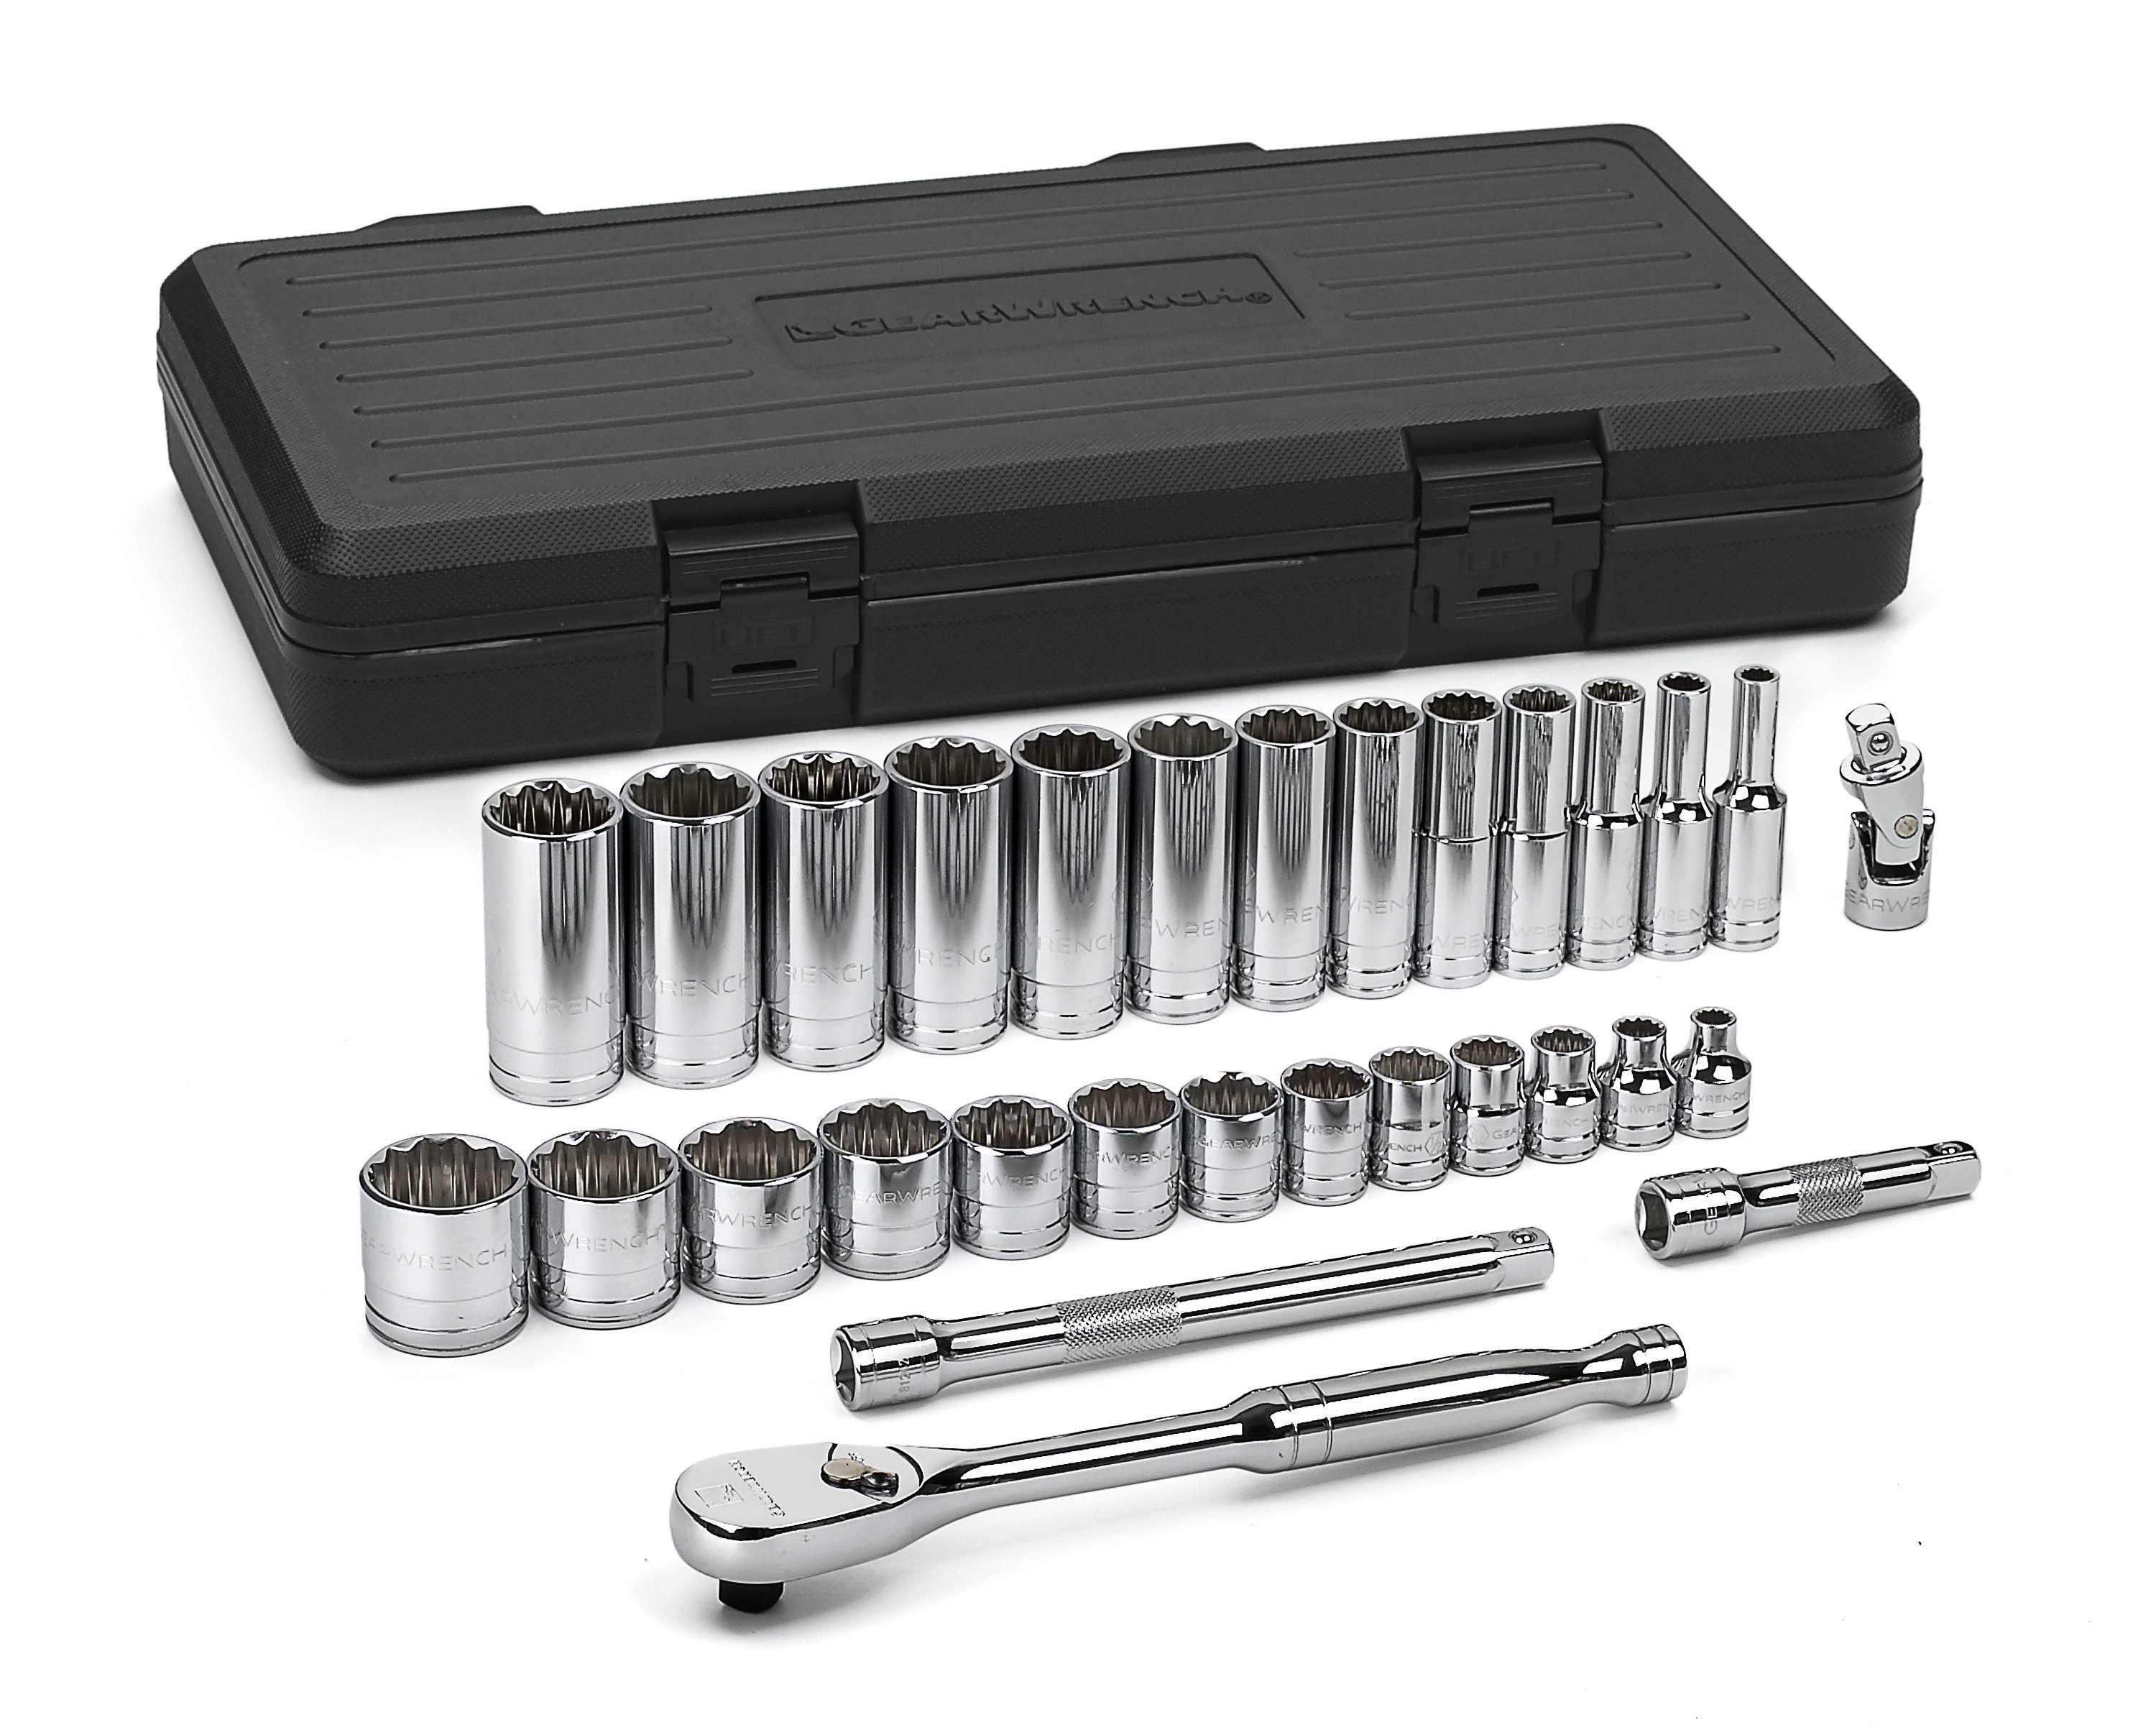 GEARWRENCH 80706 15 Piece 1/2-Inch Drive SAE Socket Set 